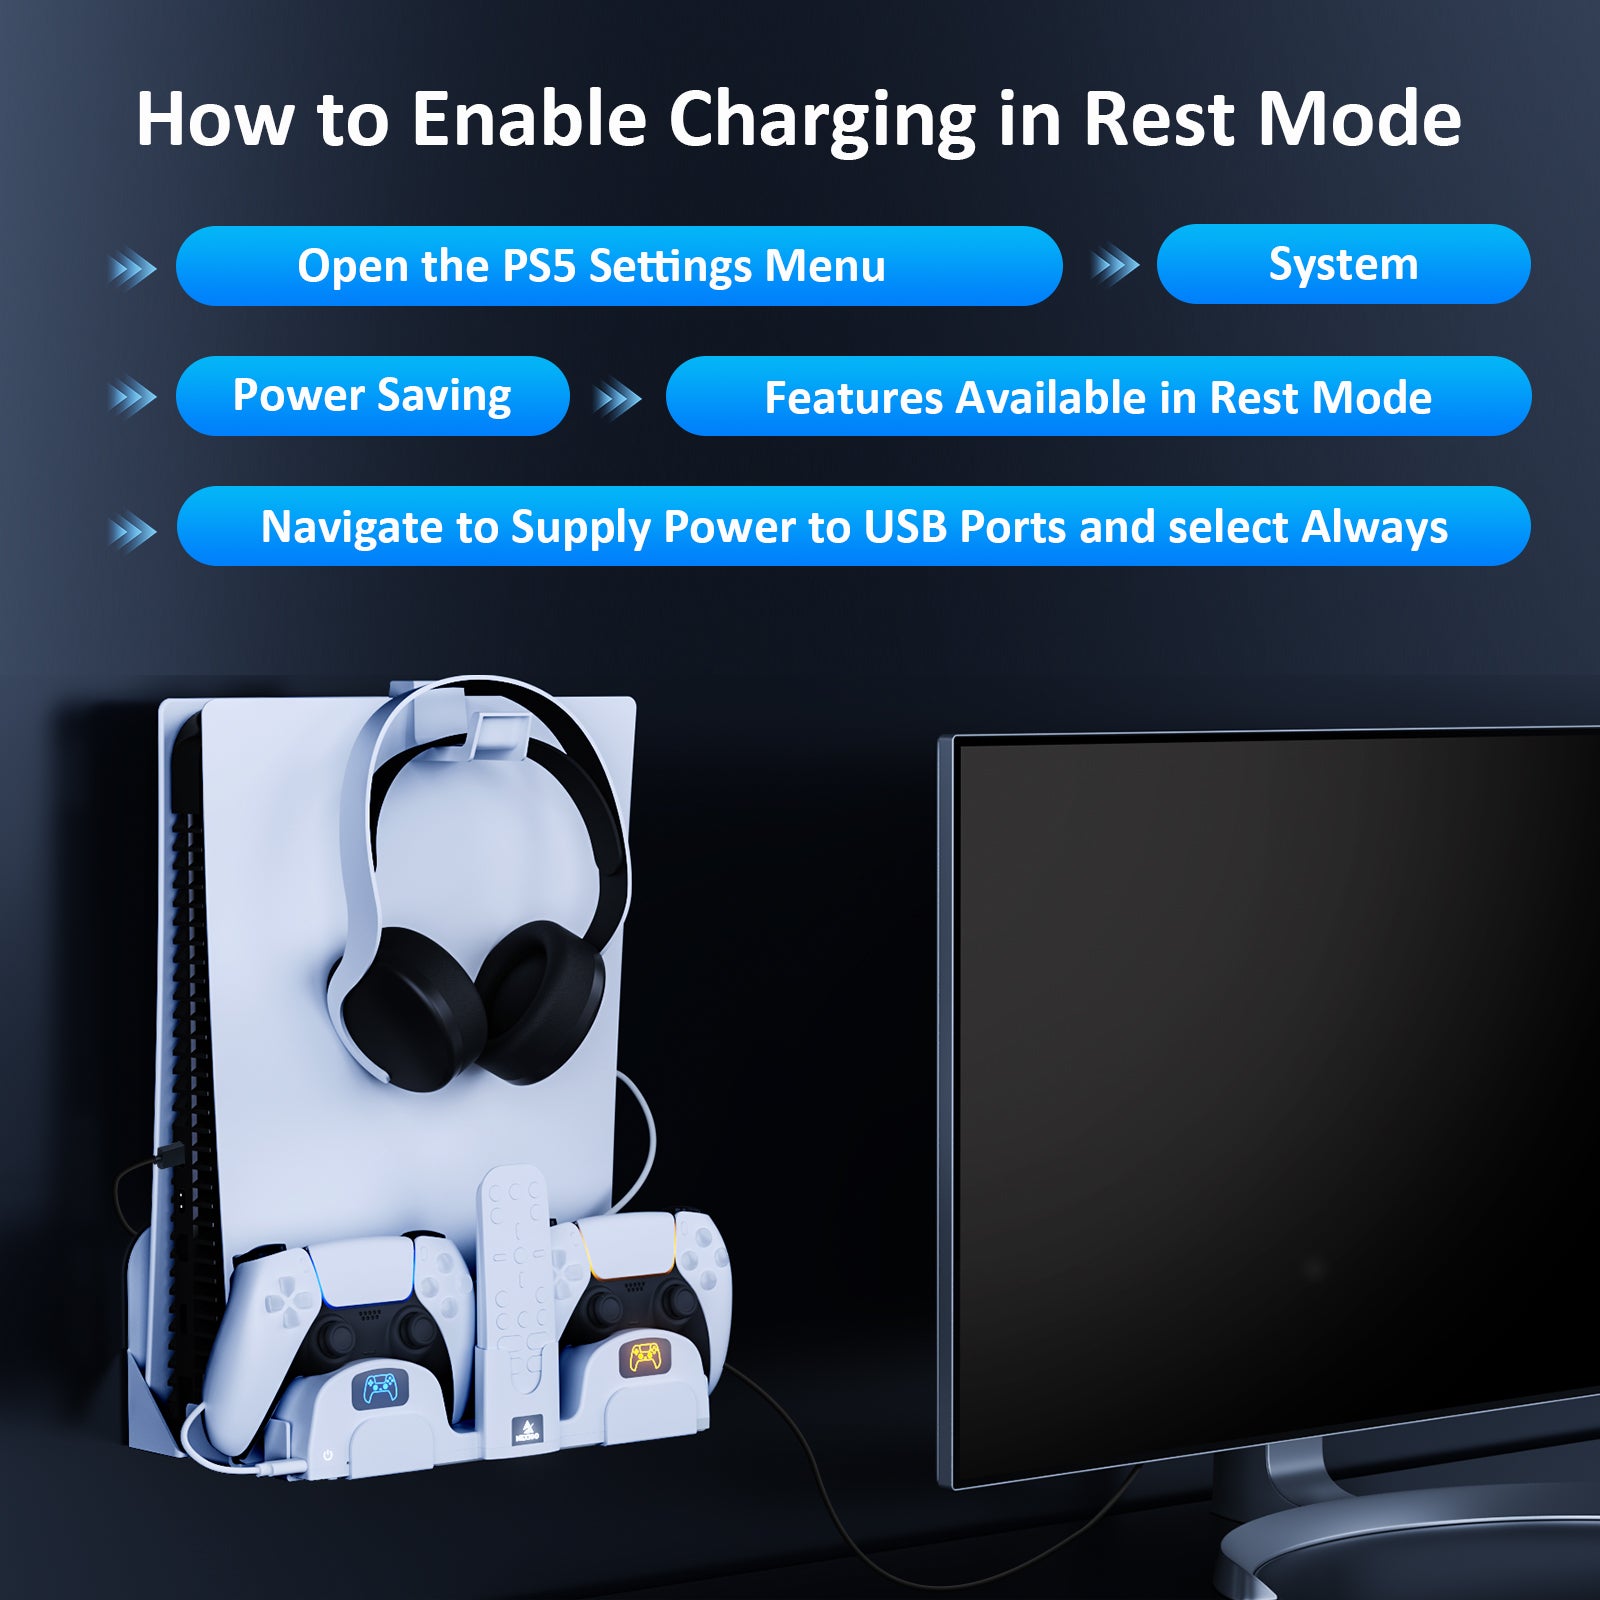 How to Enable Charging in Rest Mode